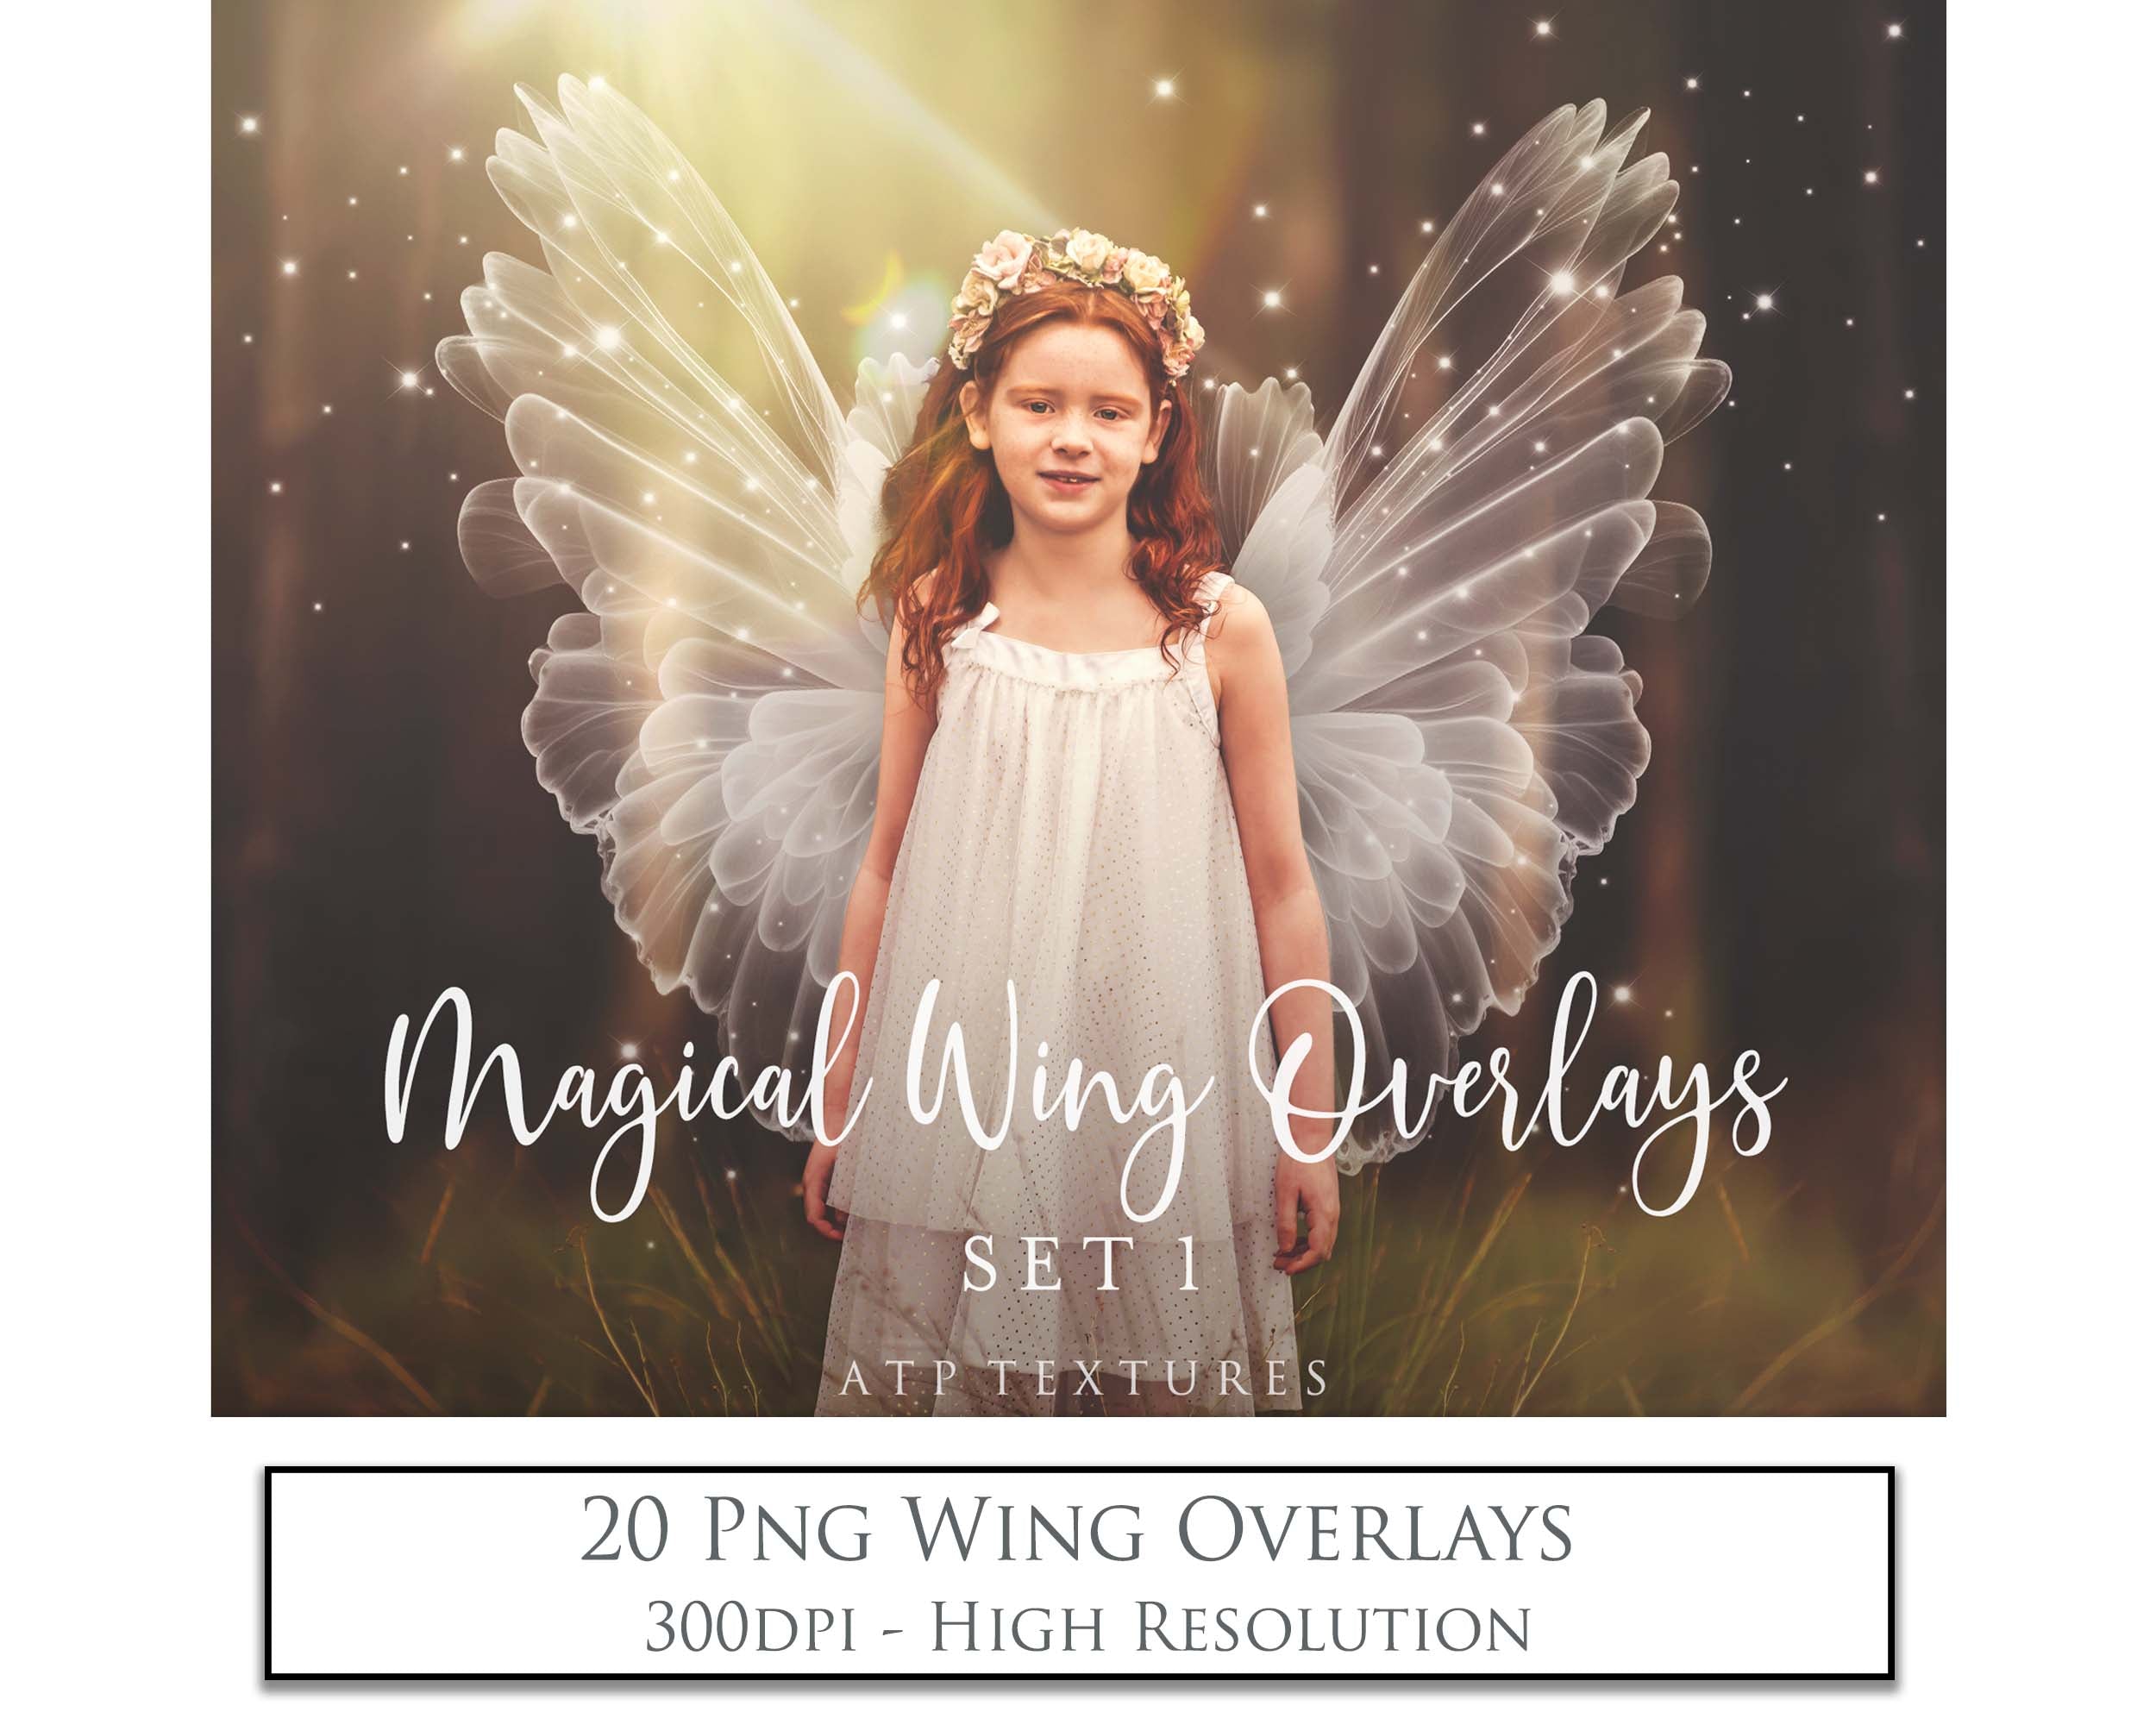 Fairy Wing Overlays For Photographers, Photoshop, Digital art and Creatives. Transparent, high resolution, faery wings for photography! These are gorgeous PNG overlays for fantasy digital art and Child portraiture. White graphic assets. ATP Textures